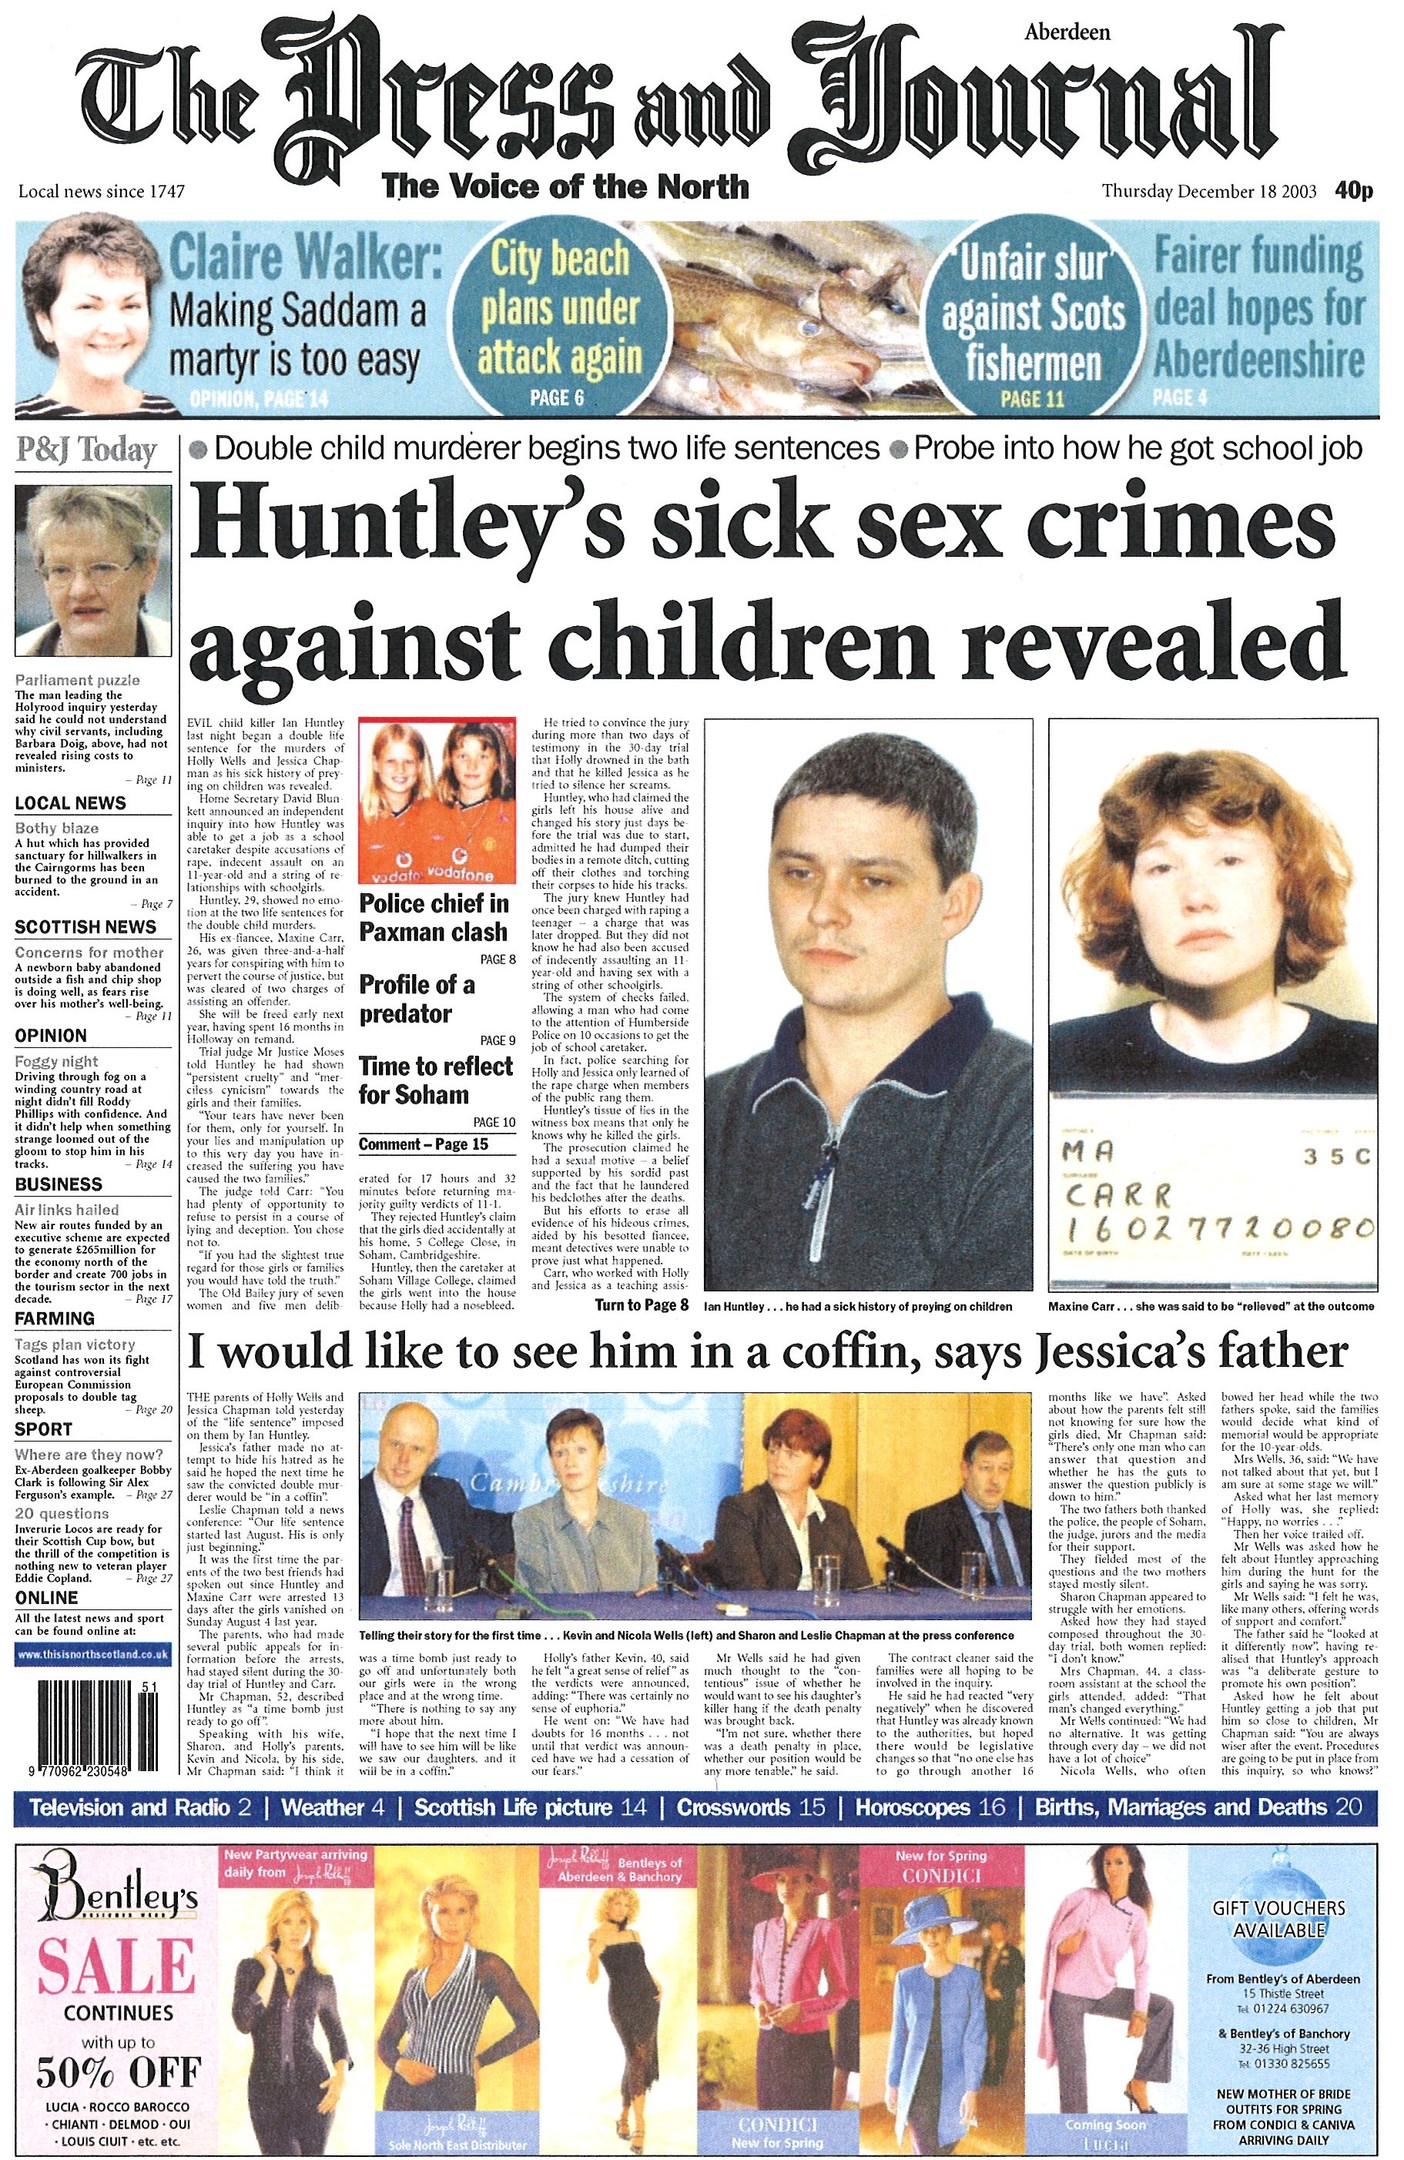 Front page on 18 December 2003